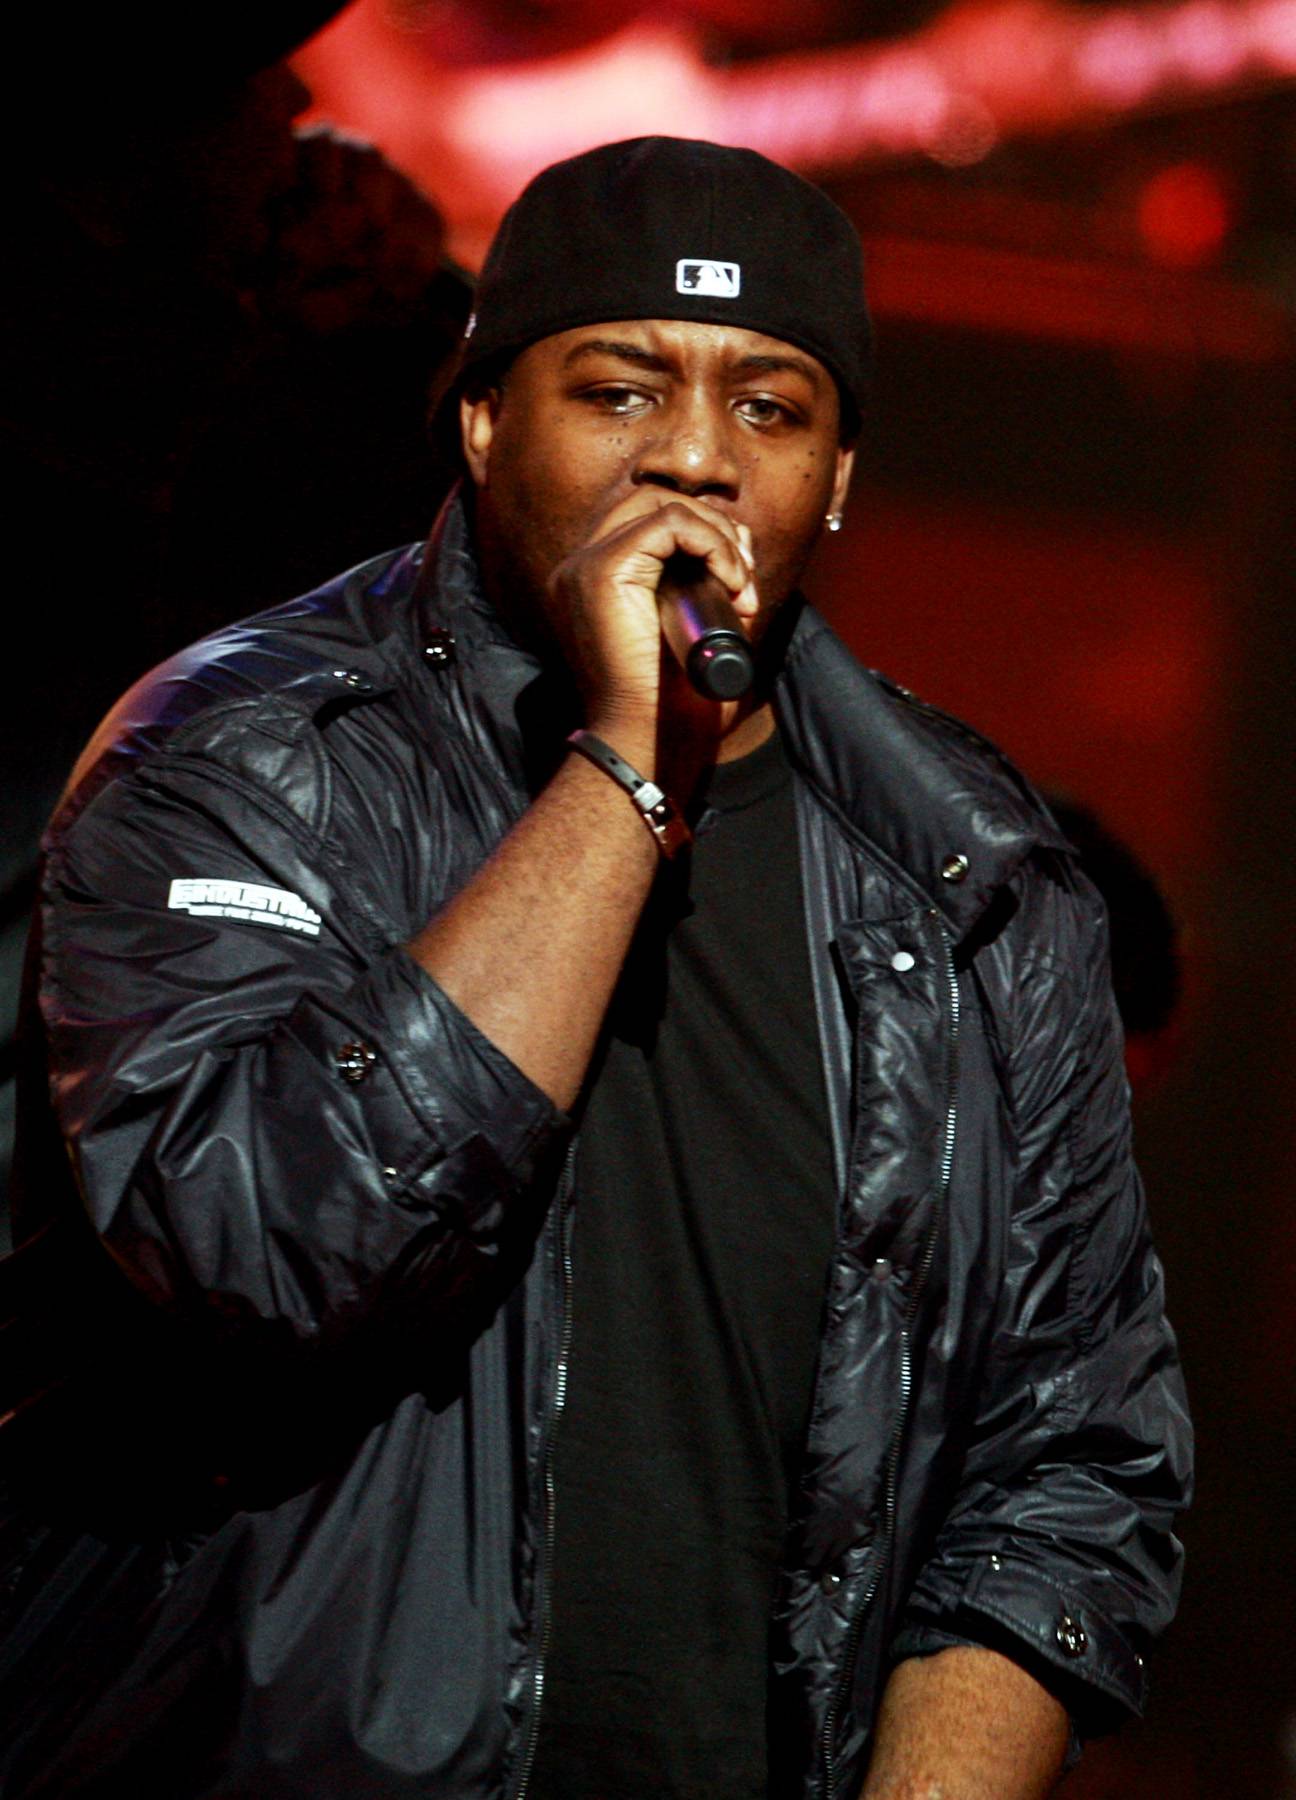 So What Cha Sayin': Erick Sermon's 10 Most Influential Songs - Just days after Heavy D passed away all too soon, another hip hop legend had a scary close call—producer/MC Erick Sermon suffered a heart attack. Although Sermon is by all accounts recovering, it's never too early to celebrate the underappreciated legacy of a rap pioneer. Though Sermon produced classic cuts for Redman and Keith Murray, his greatest impact was as a member of EPMD and a solo act. Click on see Erick Sermon's 10 most influential songs—hip hop wouldn't be the same without them. —Alex Gale (Photo: Stephen Lovekin/Getty Images)